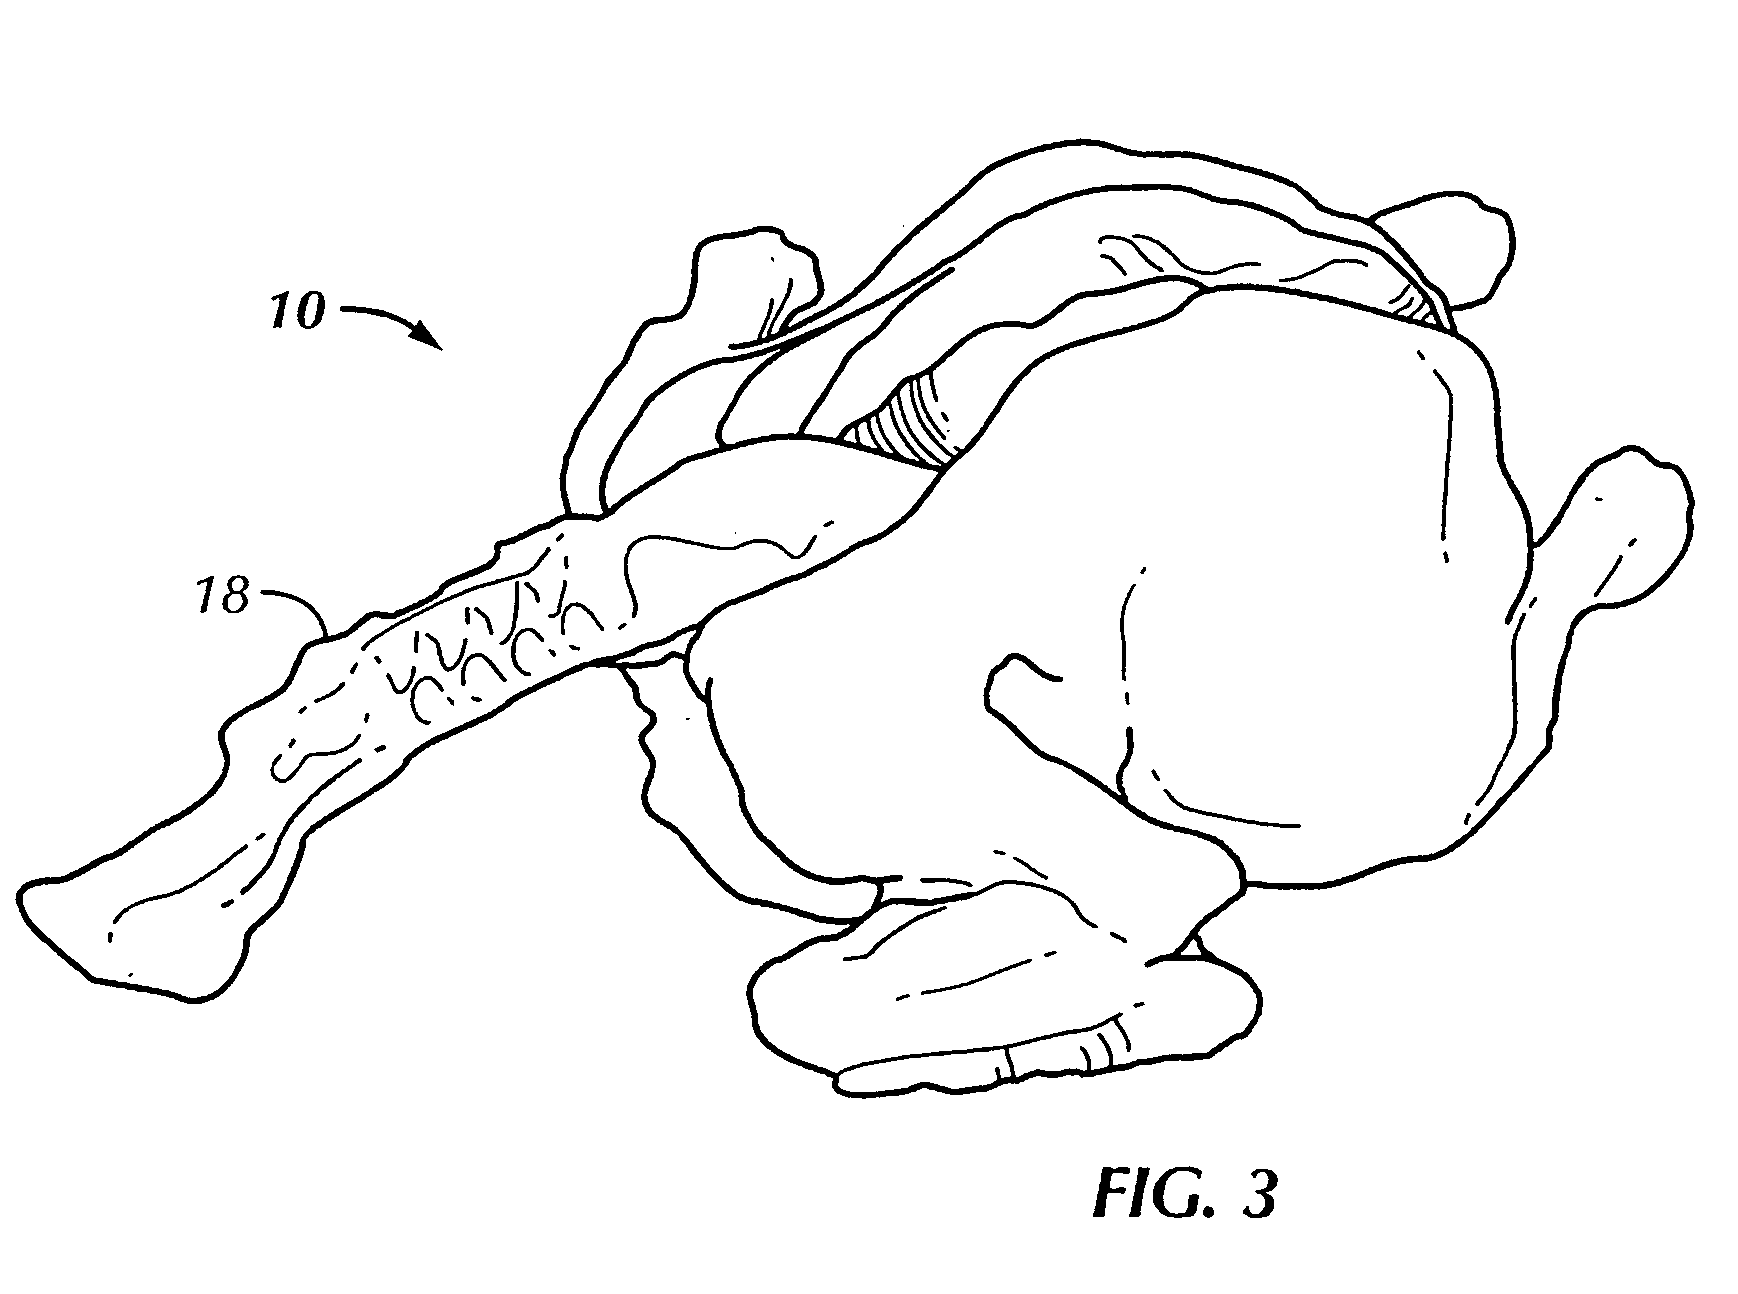 Method of preparing a bird for grilling and resulting bird product